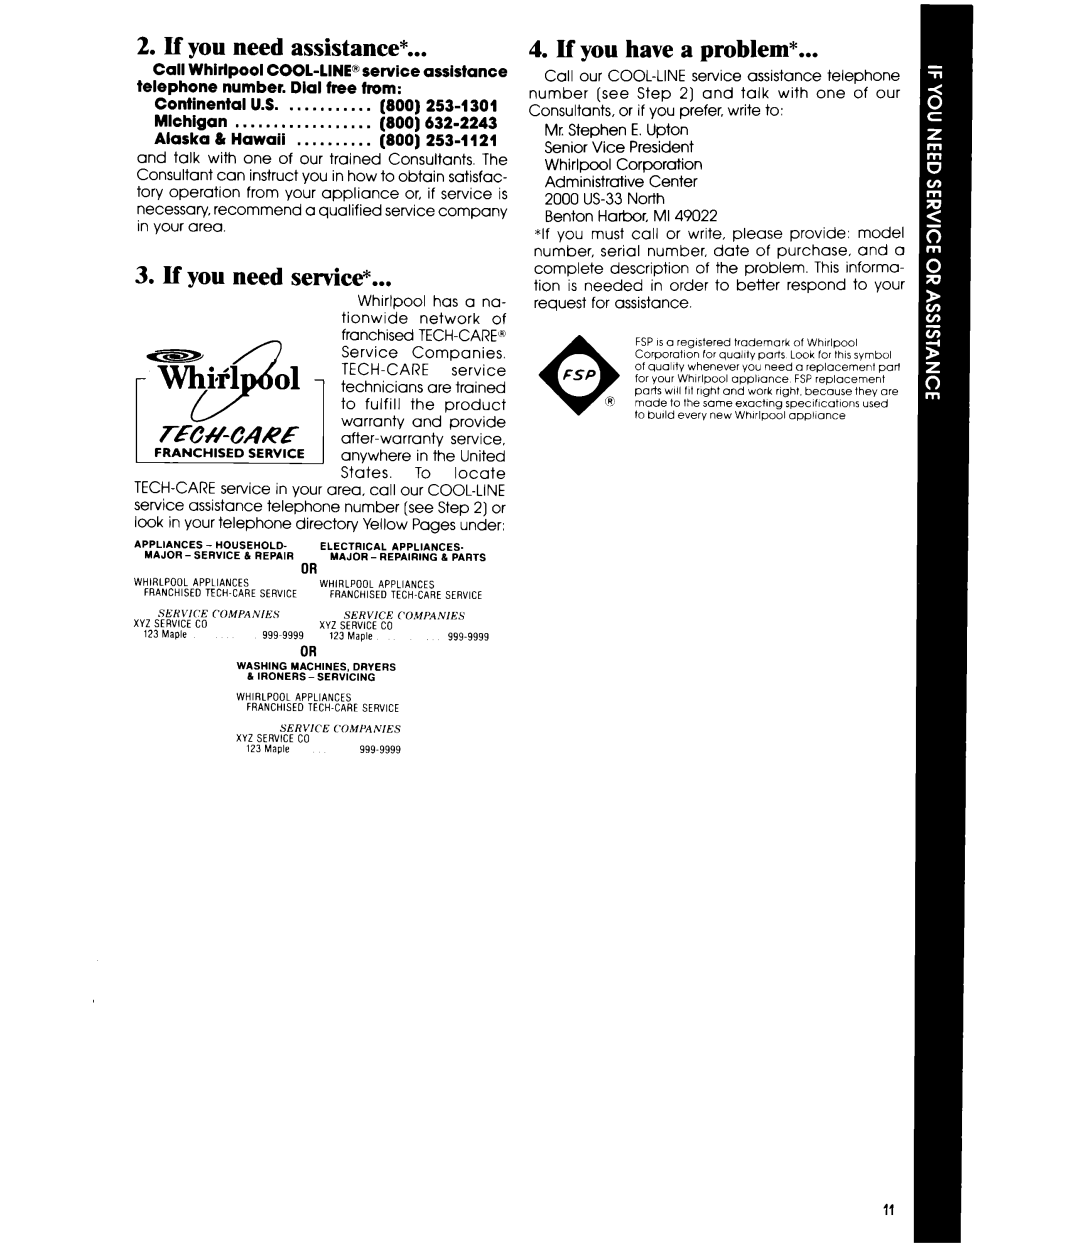 Whirlpool EV090F manual If you need assistance, lf you need sew&%, If you have a problem 